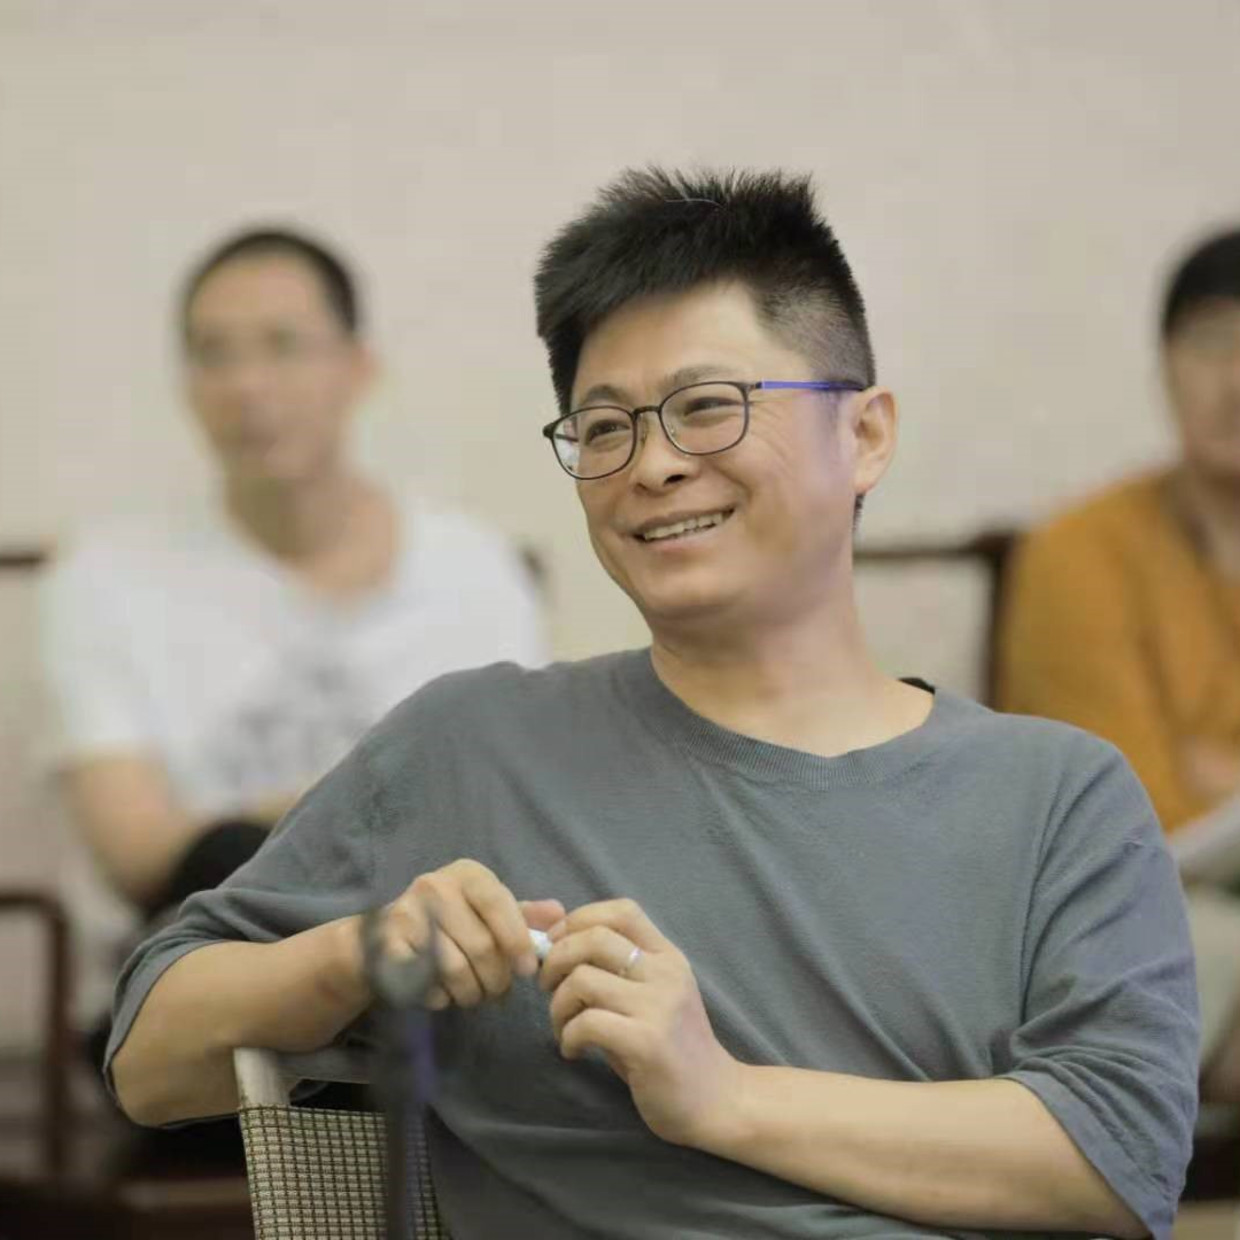 CURATOR Cai tao Associate Professor, Guangzhou Academy of Fine Arts, was formerly a curator at the Guangdong Museum of Art....